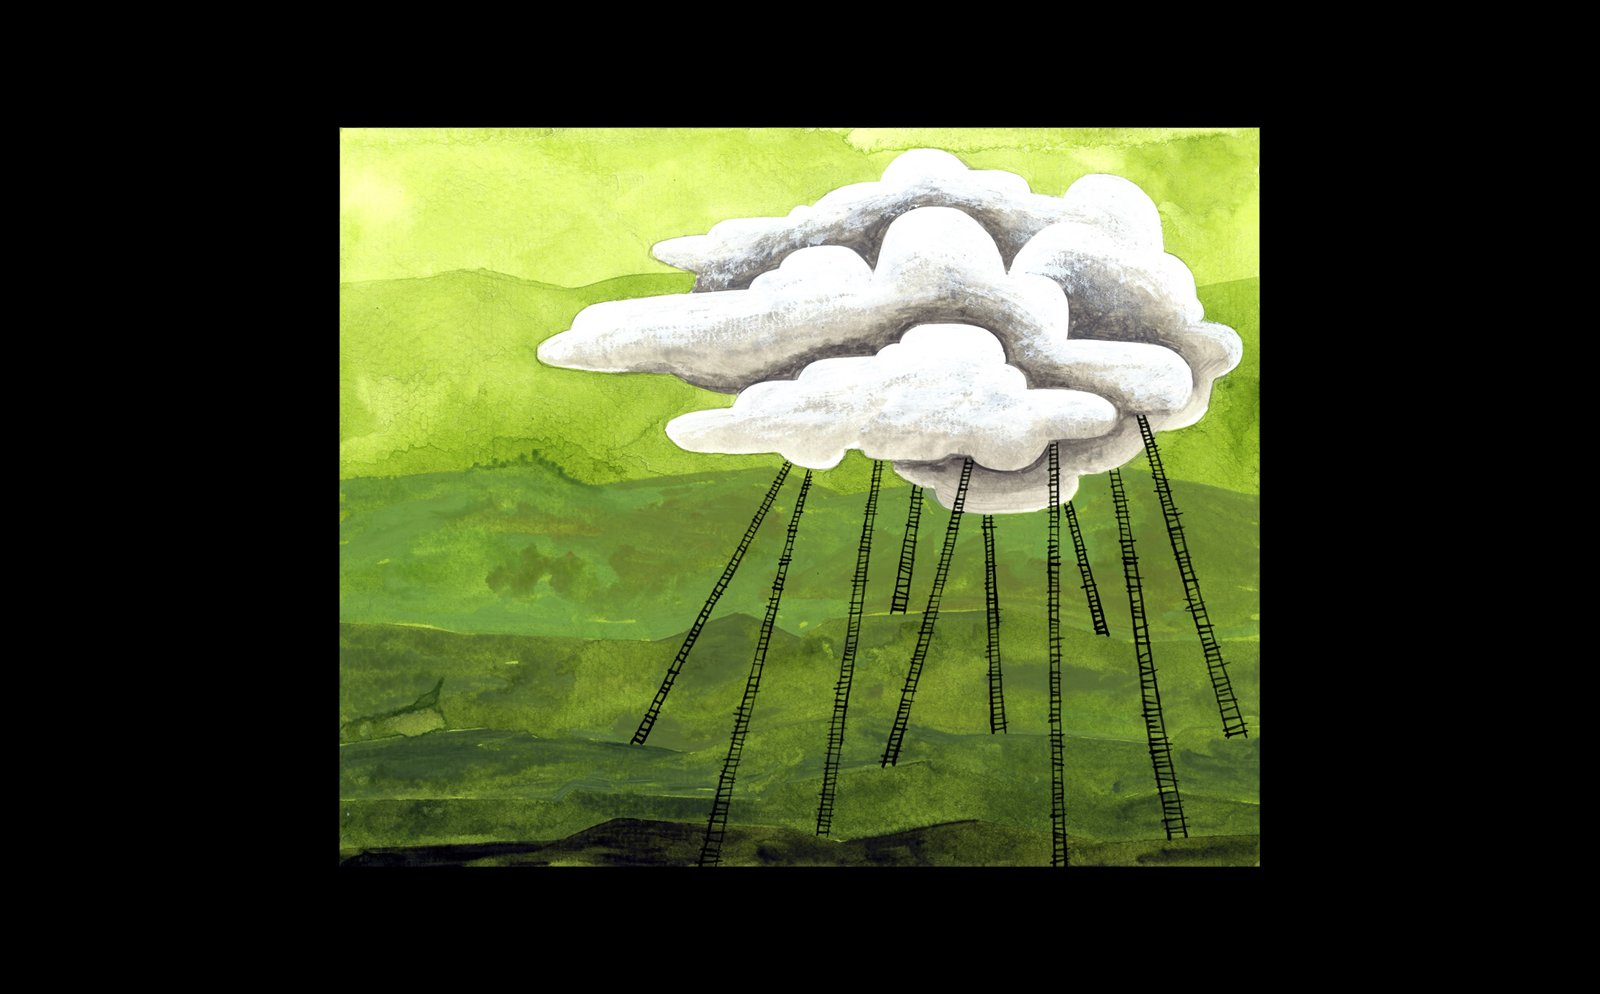 An illustration of clouds with ladders reaching down to the ground